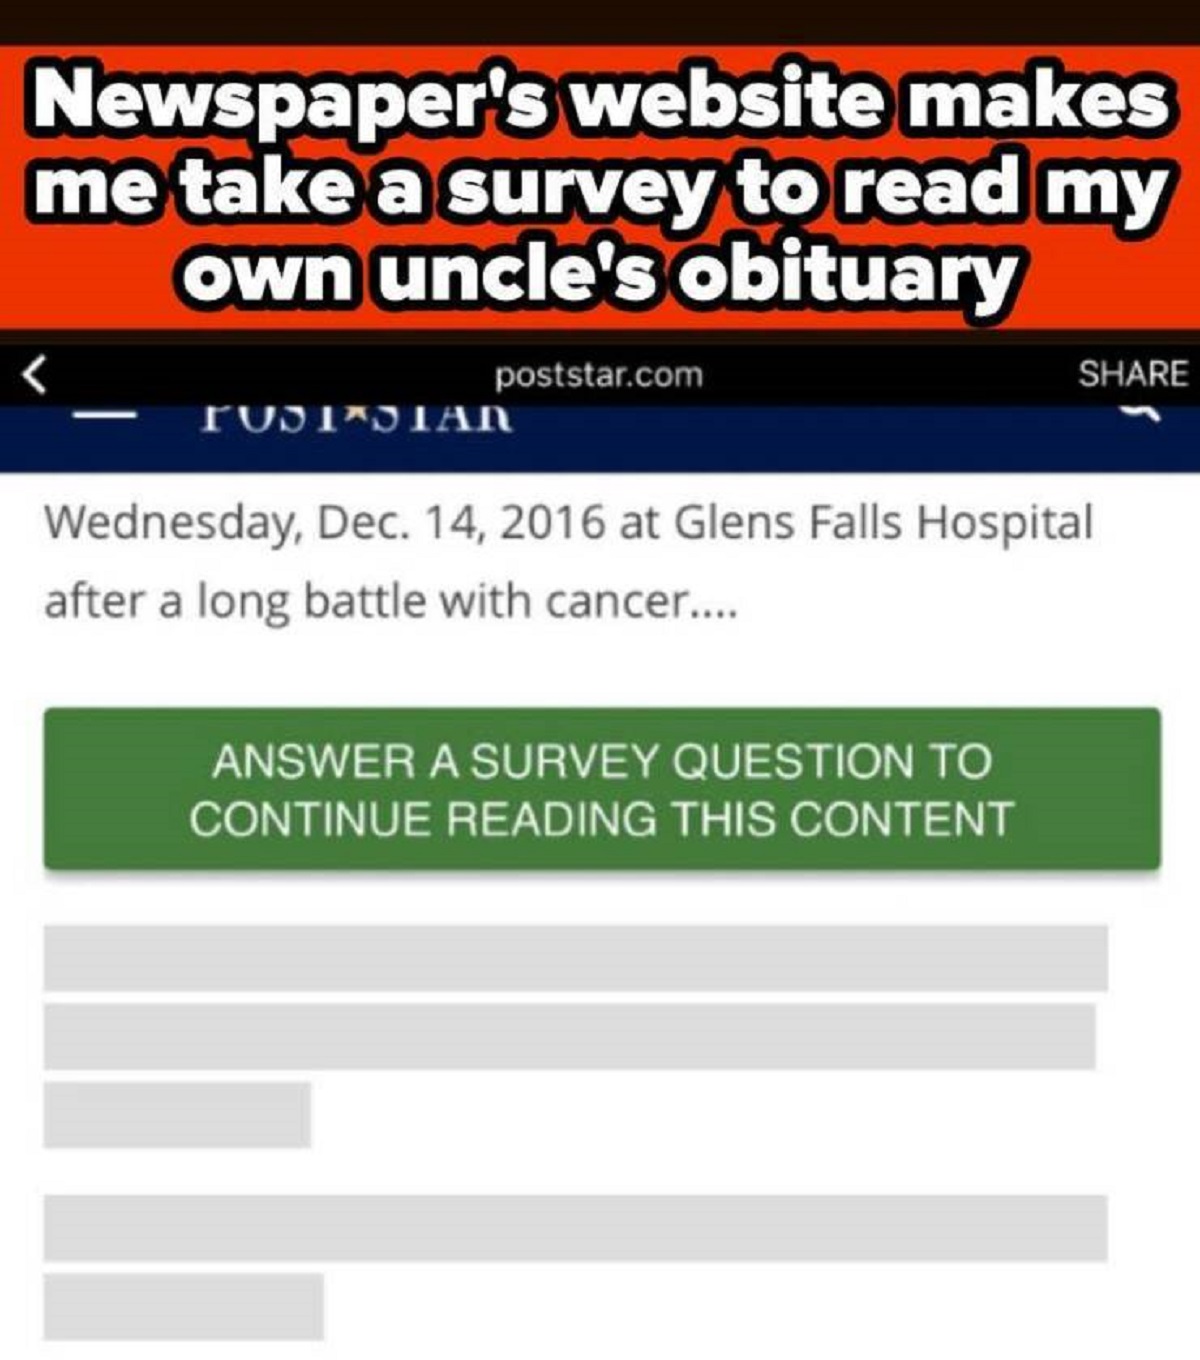 screenshot - Newspaper's website makes me take a survey to read my own uncle's obituary poststar.com Wednesday, Dec. 14, 2016 at Glens Falls Hospital after a long battle with cancer.... Answer A Survey Question To Continue Reading This Content